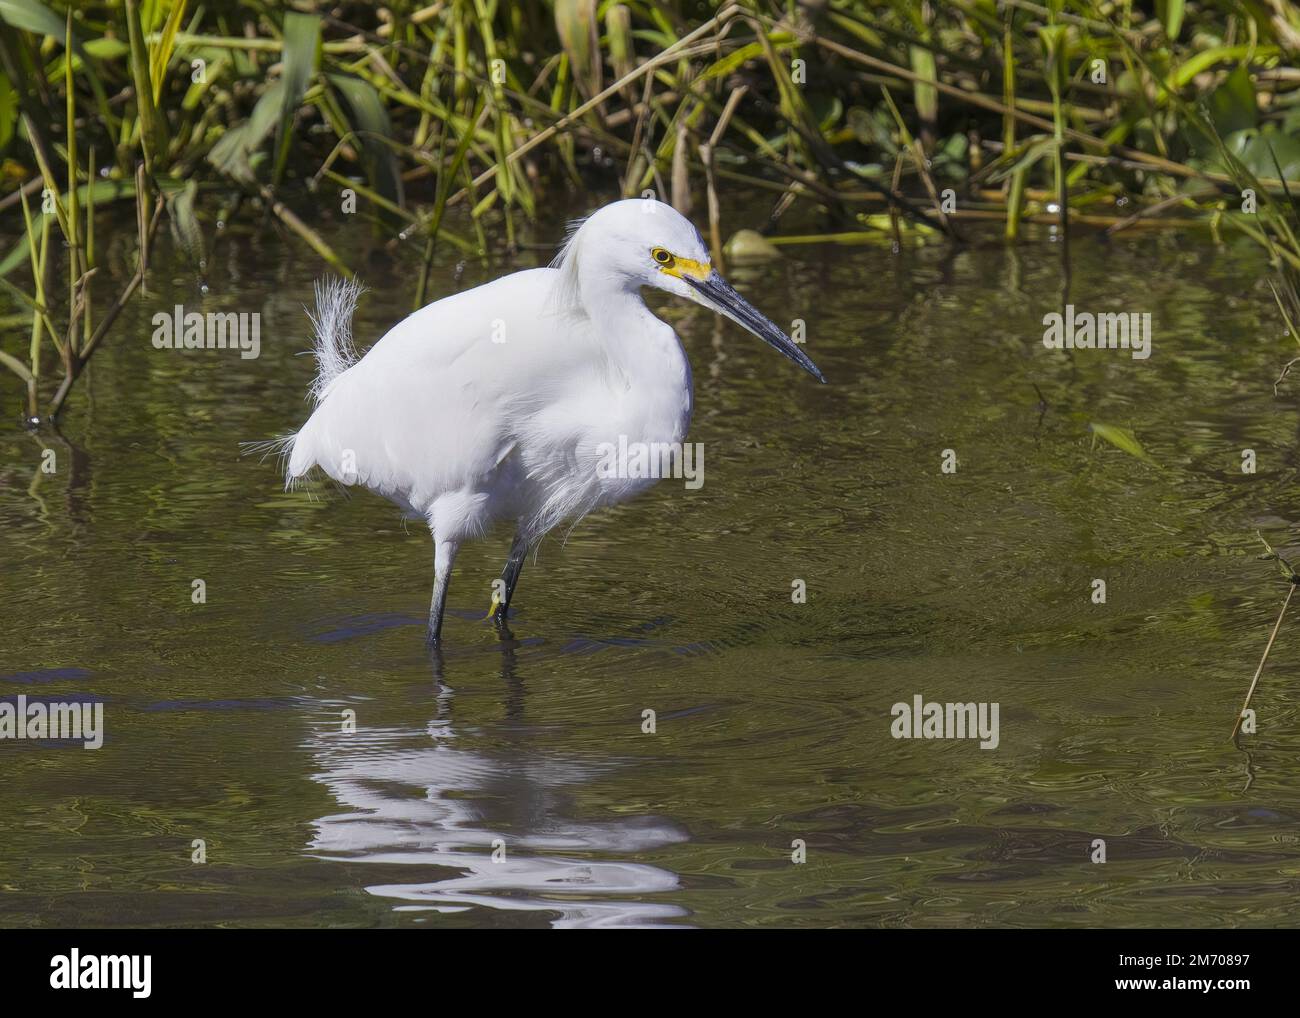 White Snowy Egret all white feathers plumage plumes and yellow face black beak wades in shallow water stream in Florida looking for fish Stock Photo